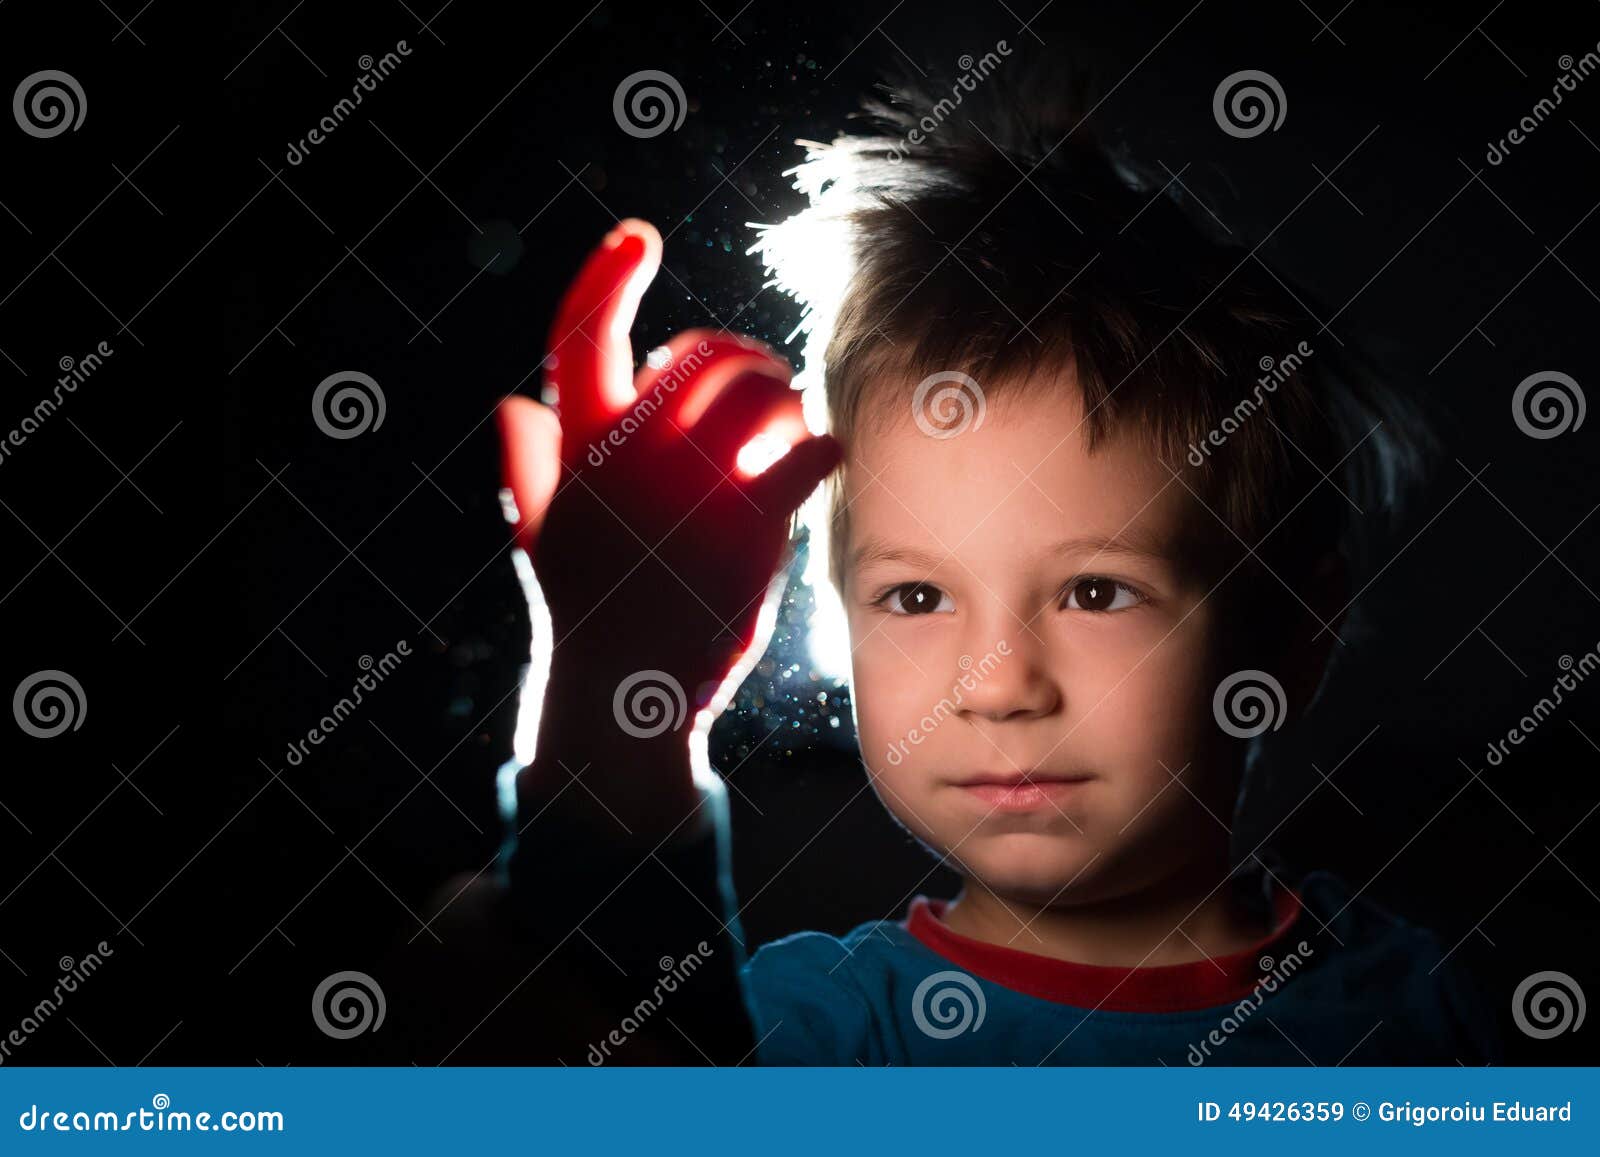 boy looking with great curiosity at his hand in a ray of light